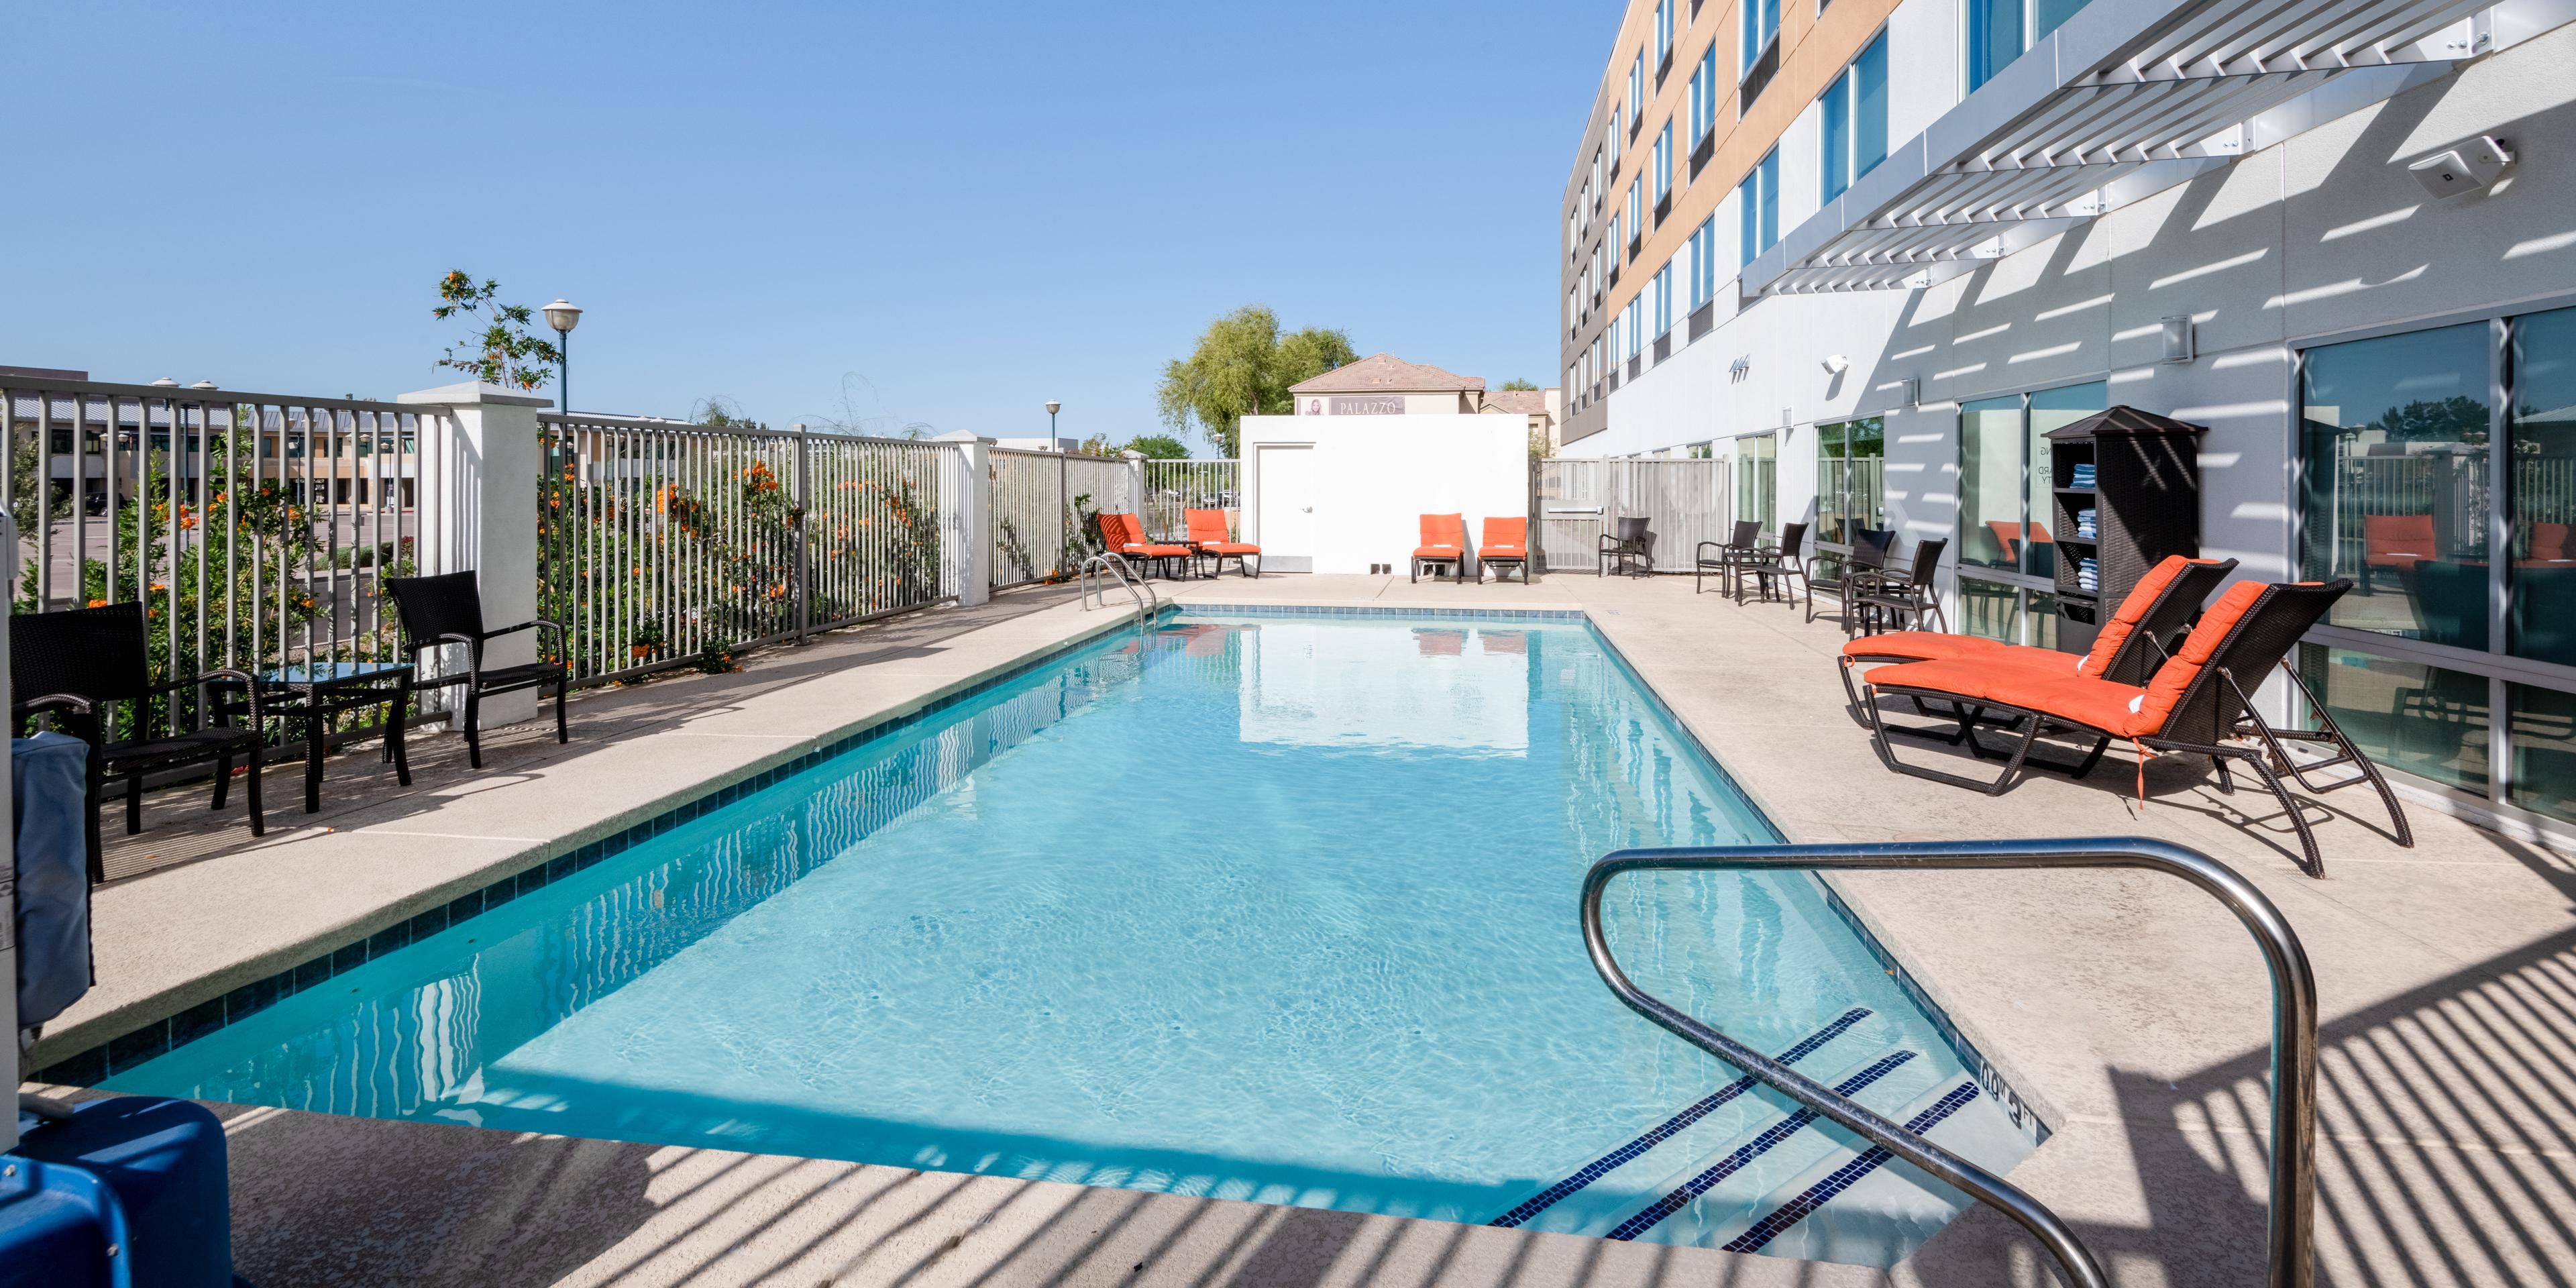 No matter what season you visit Phoenix, enjoy relaxing with a dip in our outdoor heated pool year round.